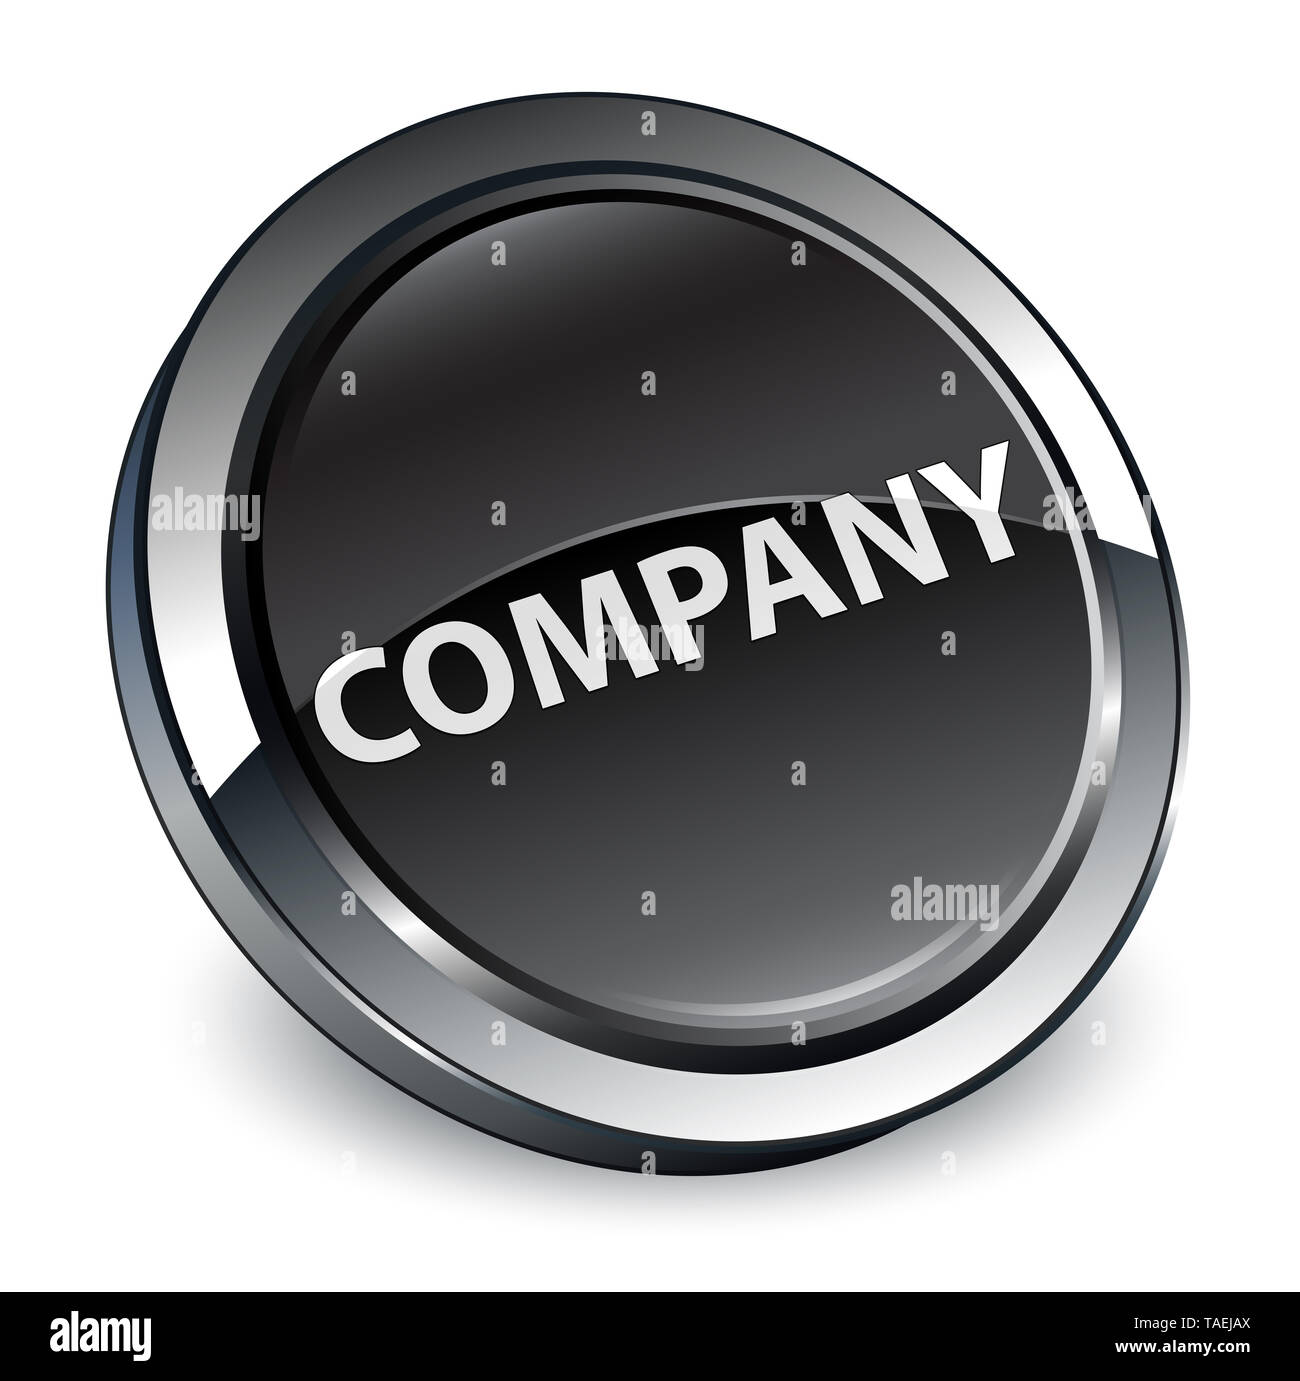 Company isolated on 3d black round button abstract illustration Stock Photo